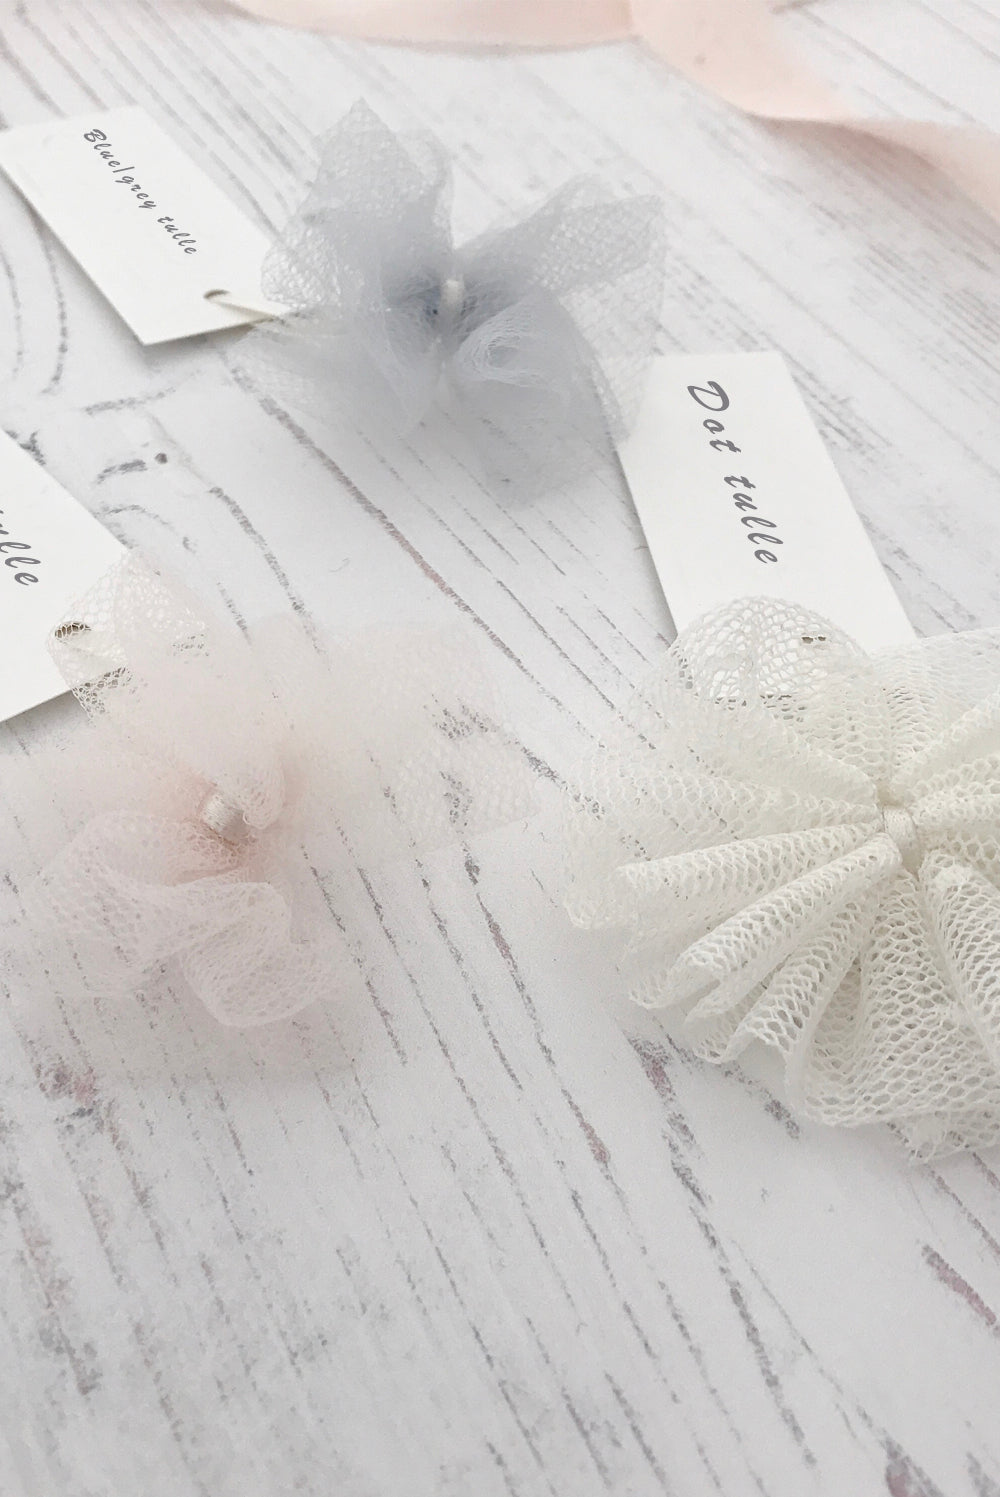 tulle samples